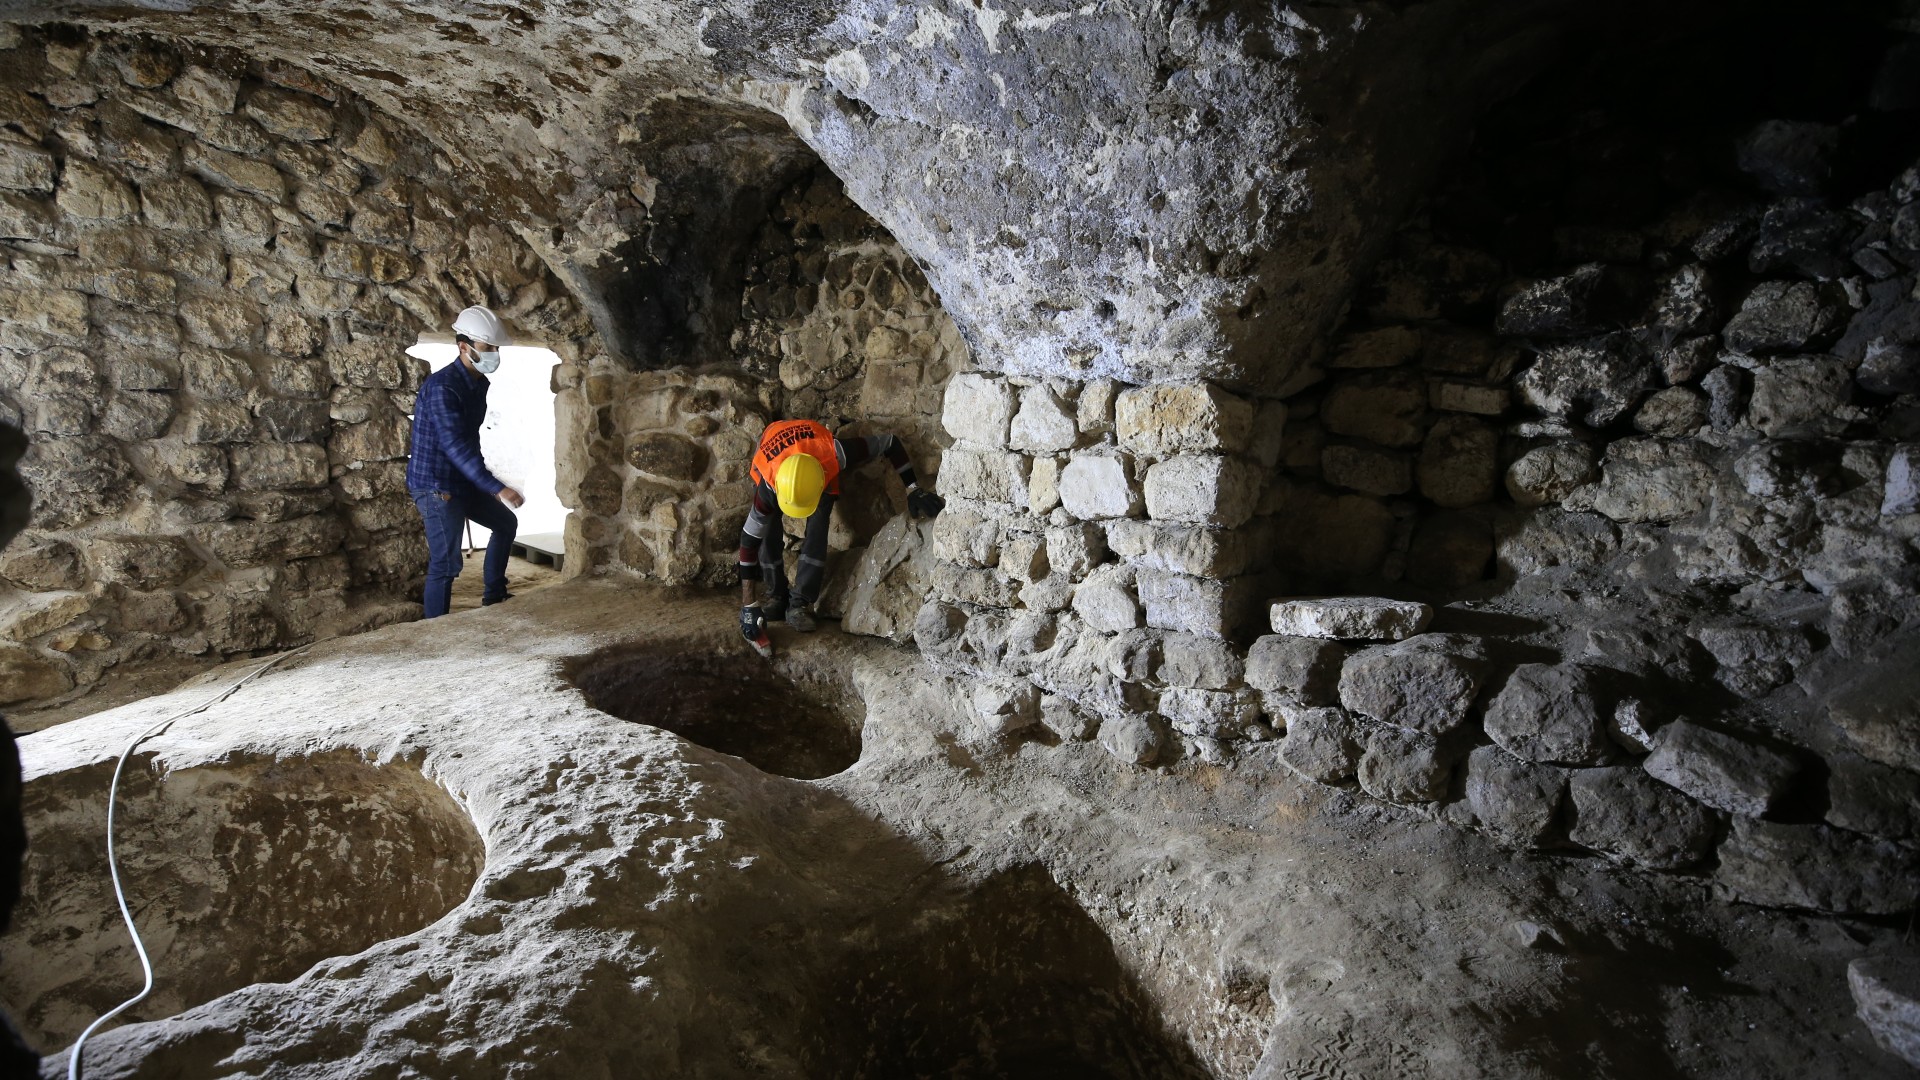 Two people wearing helmets, masks and high-visibility vests explore an underground cave believed to be a city.  The walls are lined with large cobblestones and there are three circular holes in the floor.